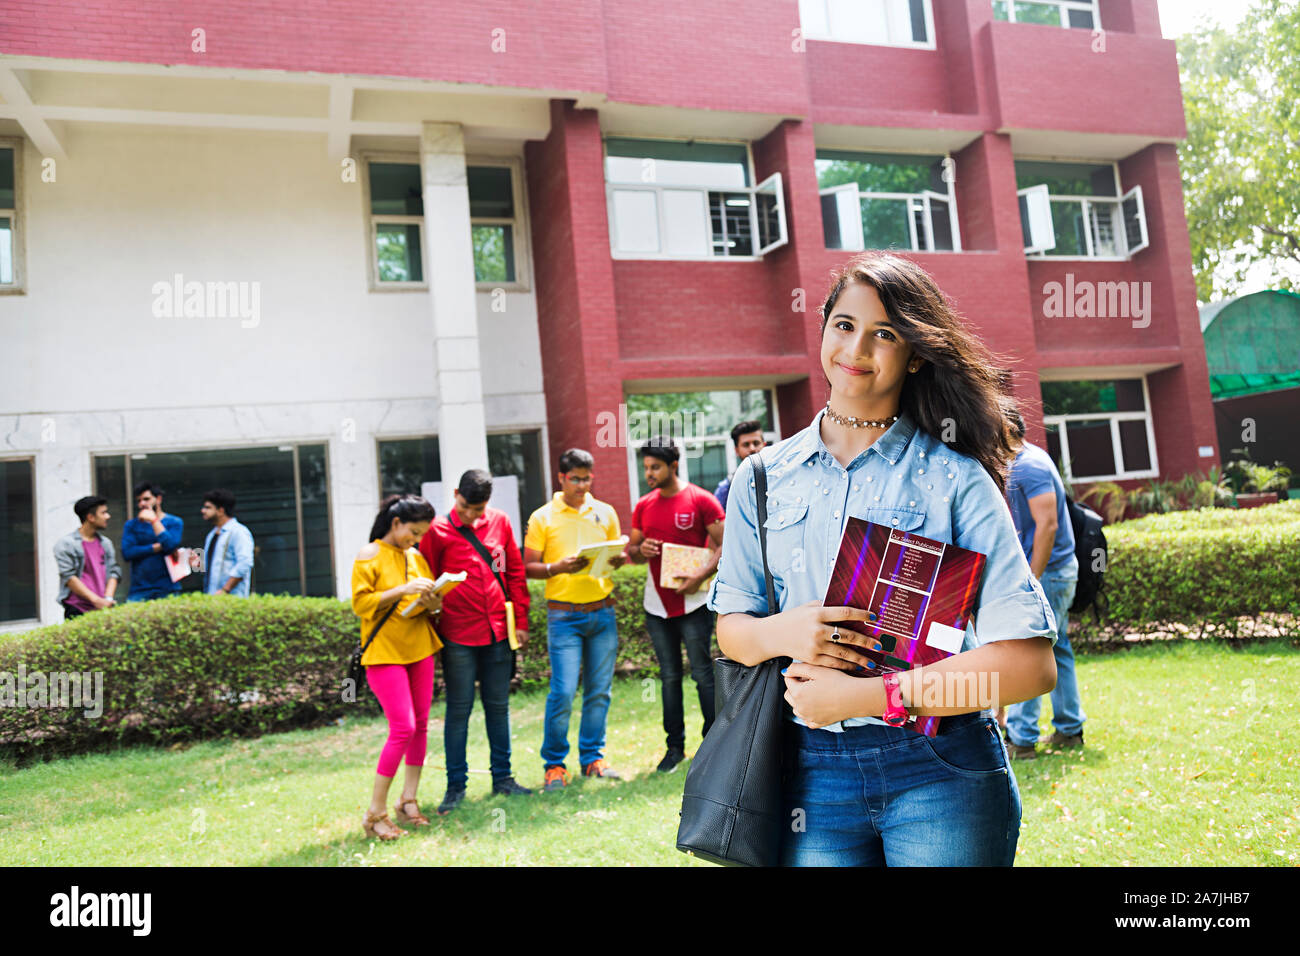 Young Girl College student Holding Book And Students In-The-background In-Outside Campus Building Stock Photo